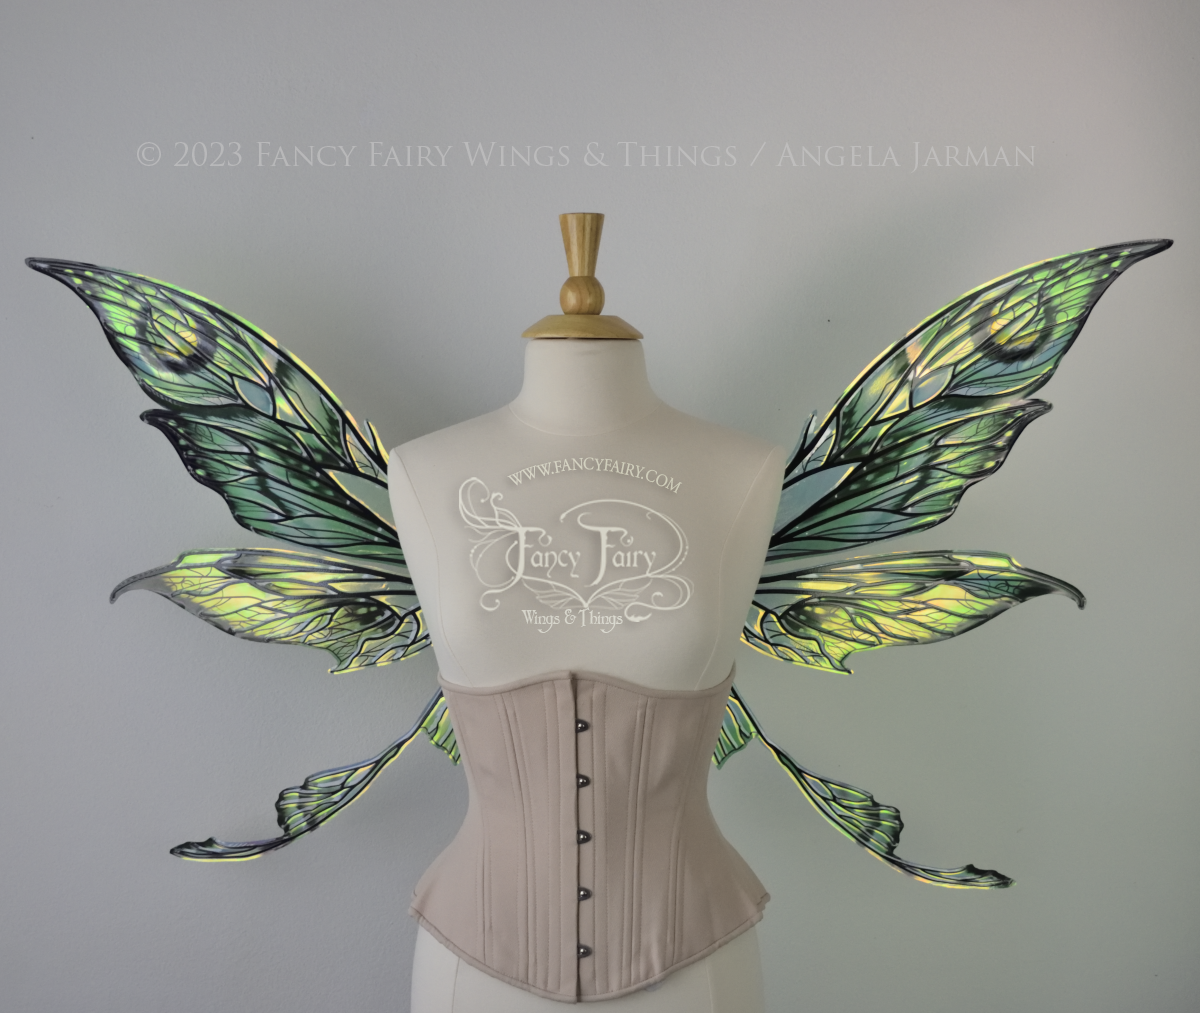 Front view of large green, gold & black painted iridescent fairy wings with black veins. Upper panels are elongated with pointed tips, a ‘tail’, lots of vein detail